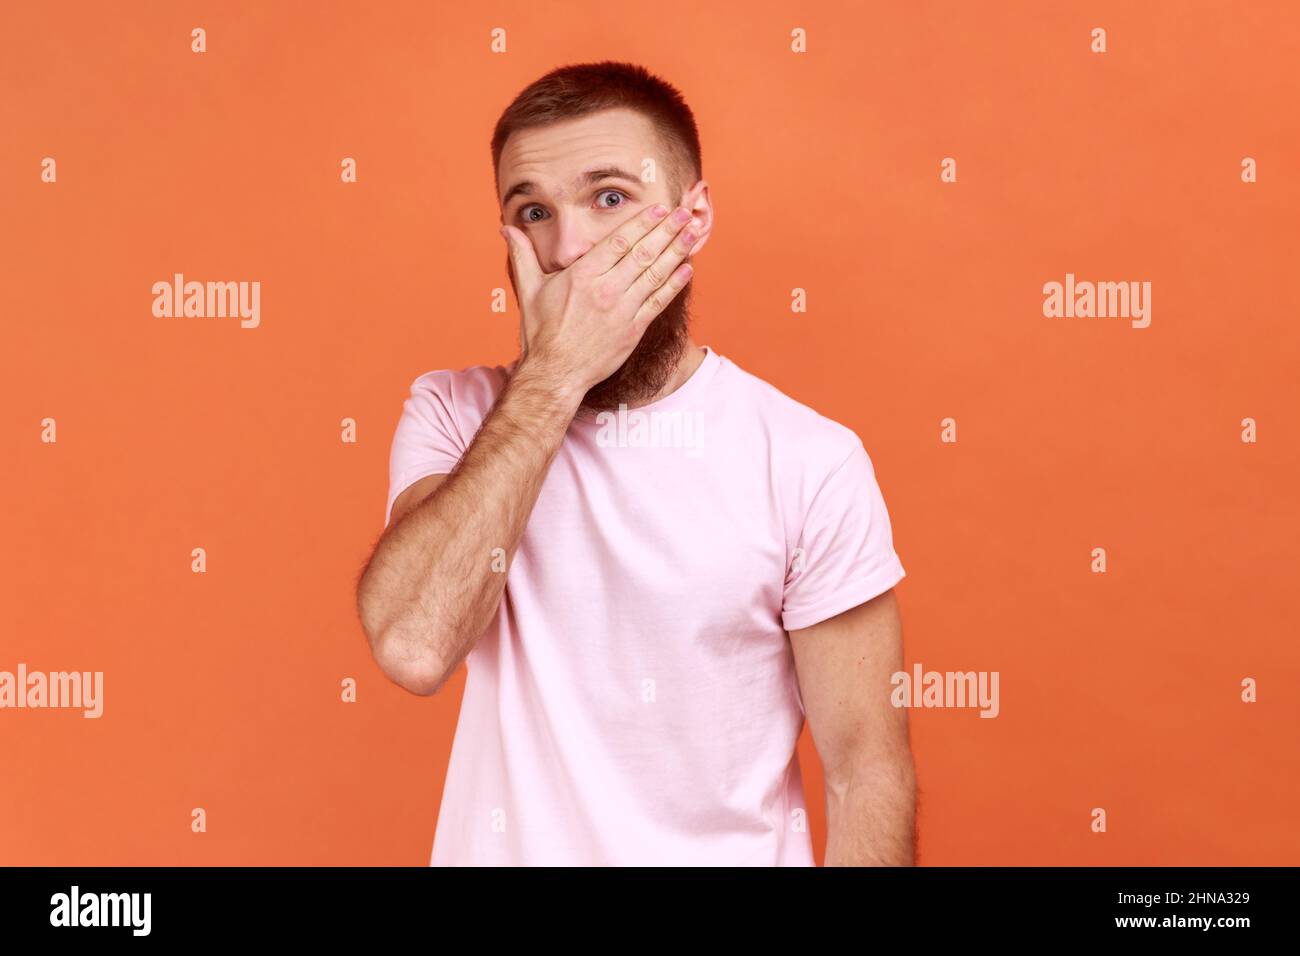 Portrait of bearded man covering mouth with hand to keep silent, afraid to say secret, looking with intimidated expression, wearing pink T-shirt. Indoor studio shot isolated on orange background. Stock Photo